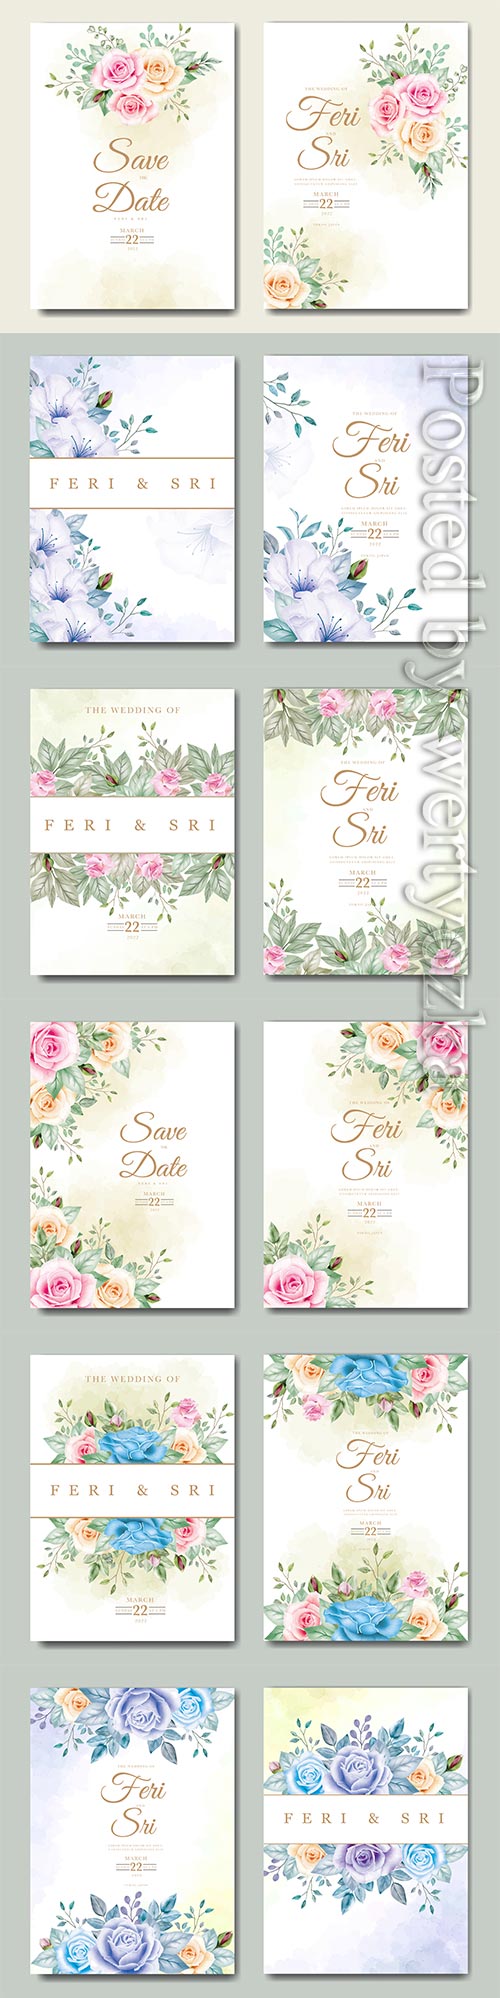 Beautiful wedding invitation vector card with floral watercolor